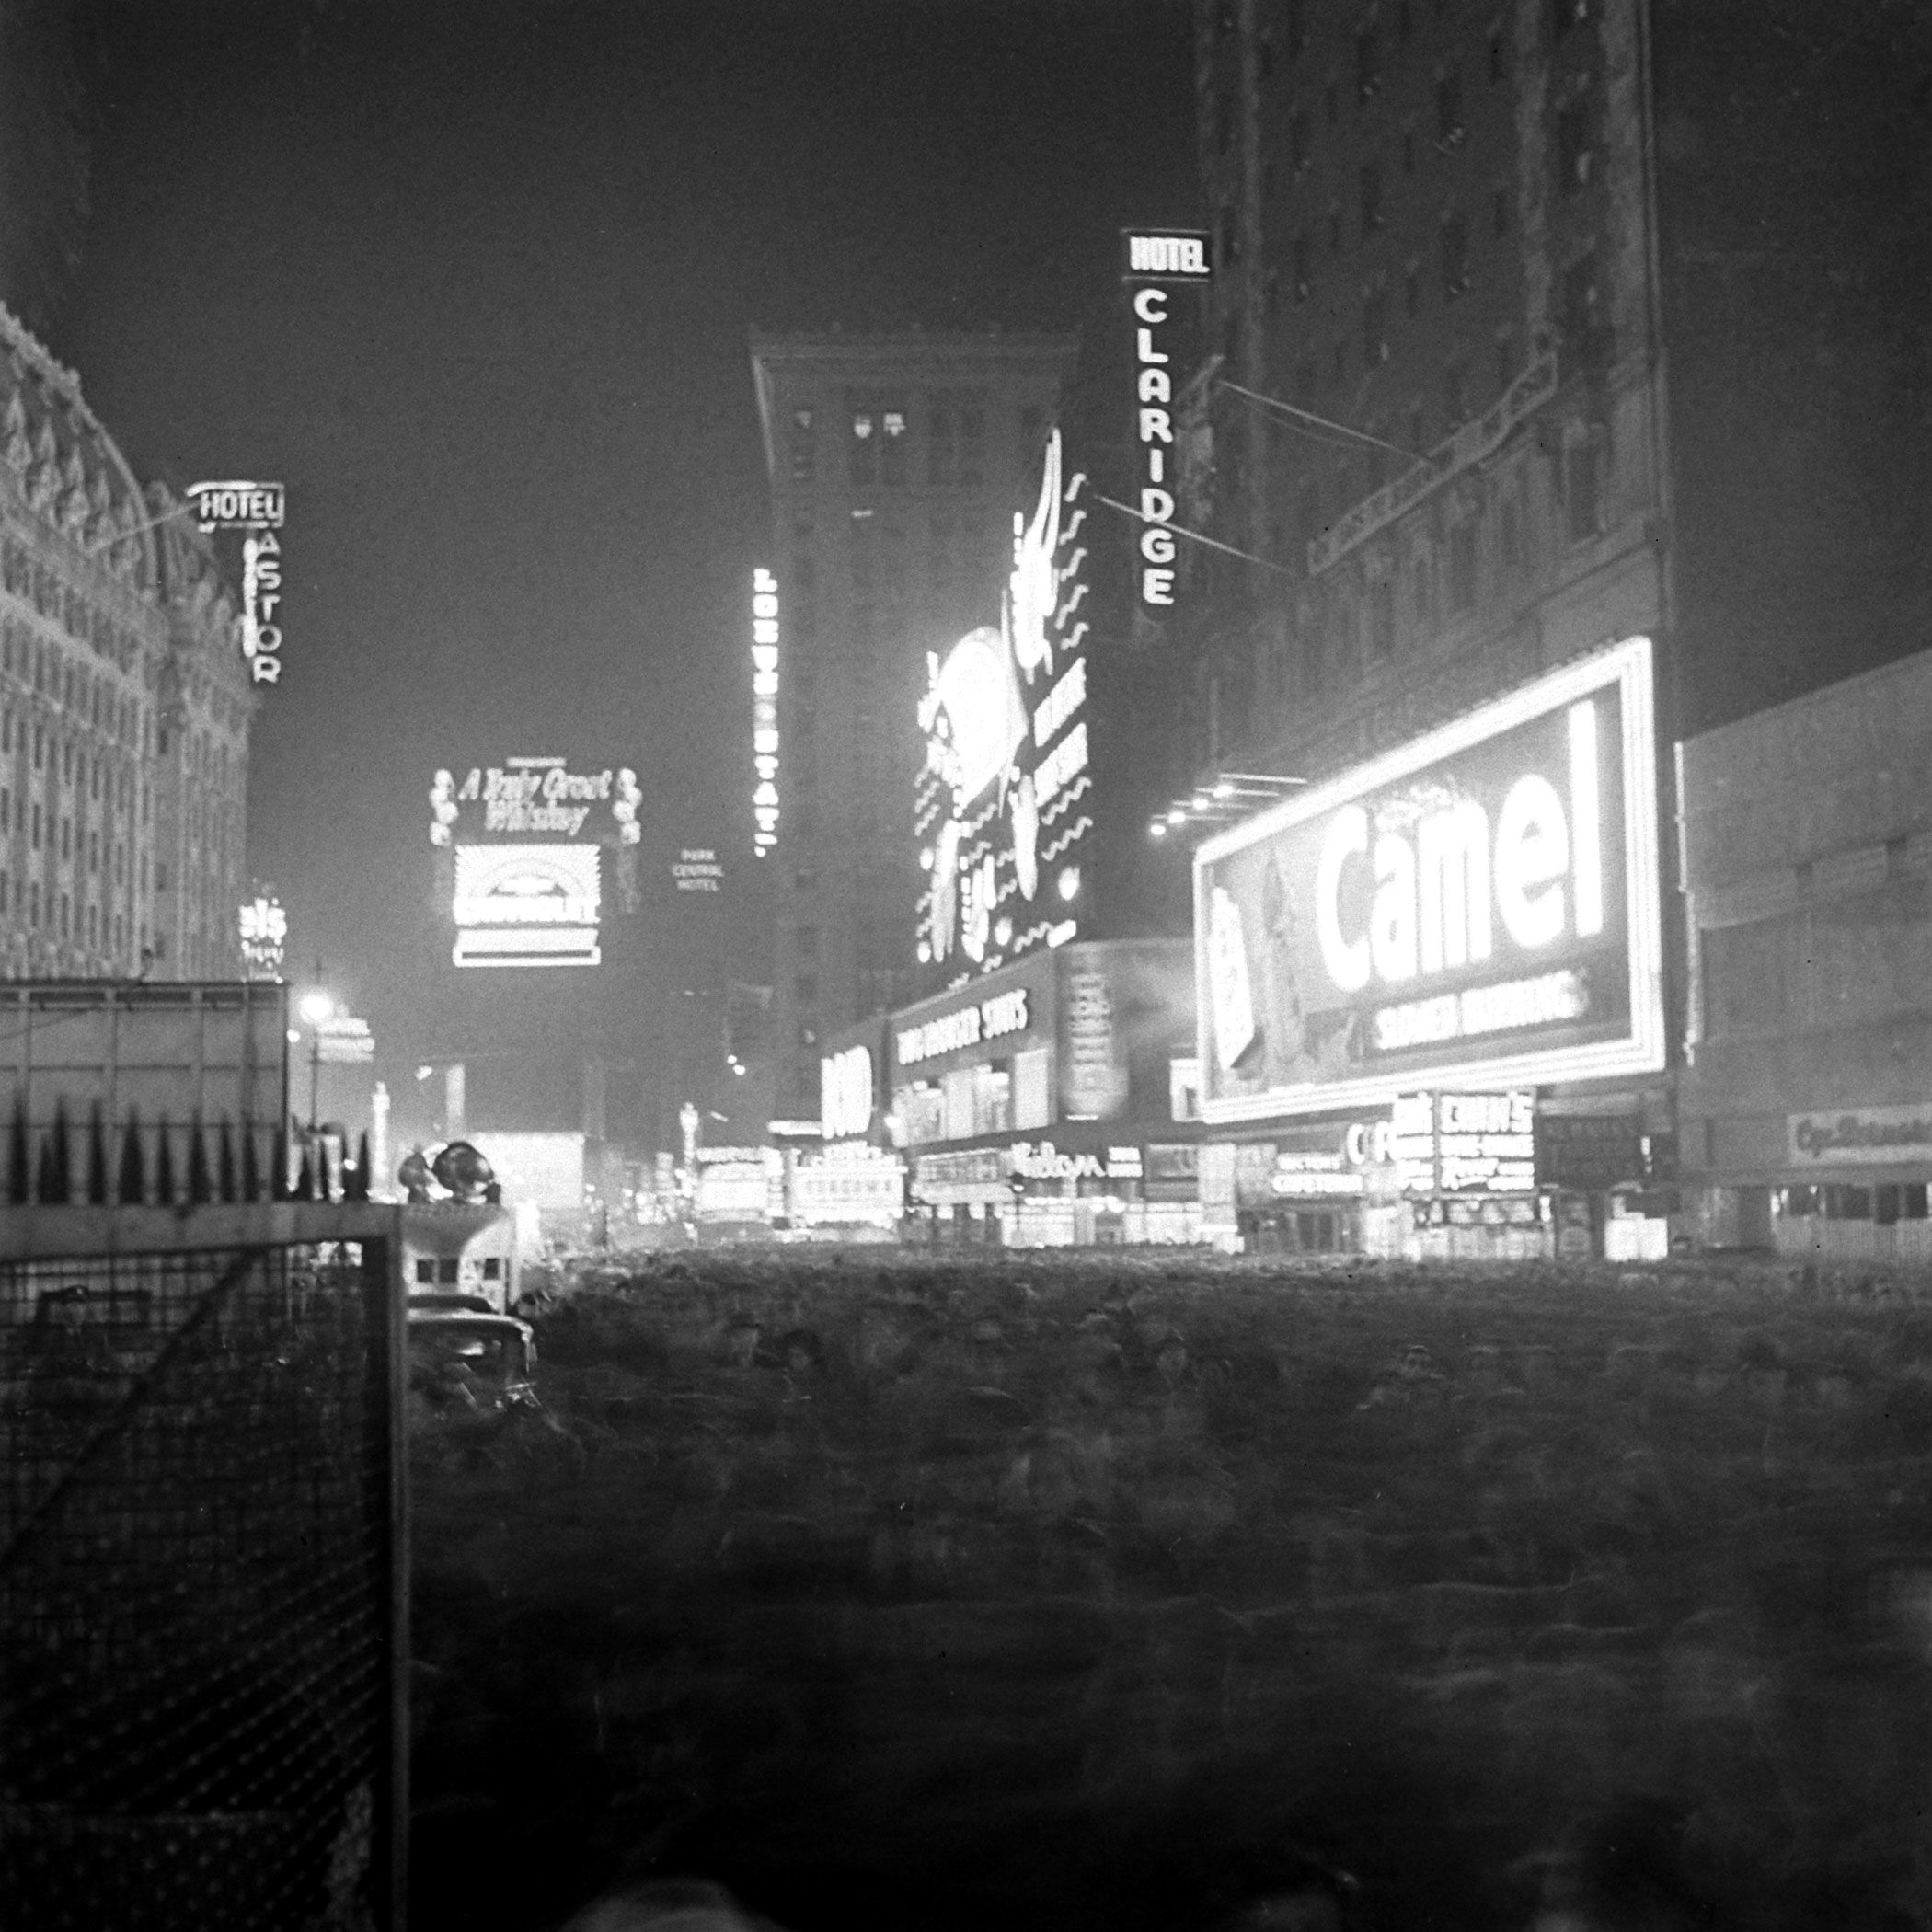 Times Square in New York City on New Year's Eve, as 1941 turns to 1942.